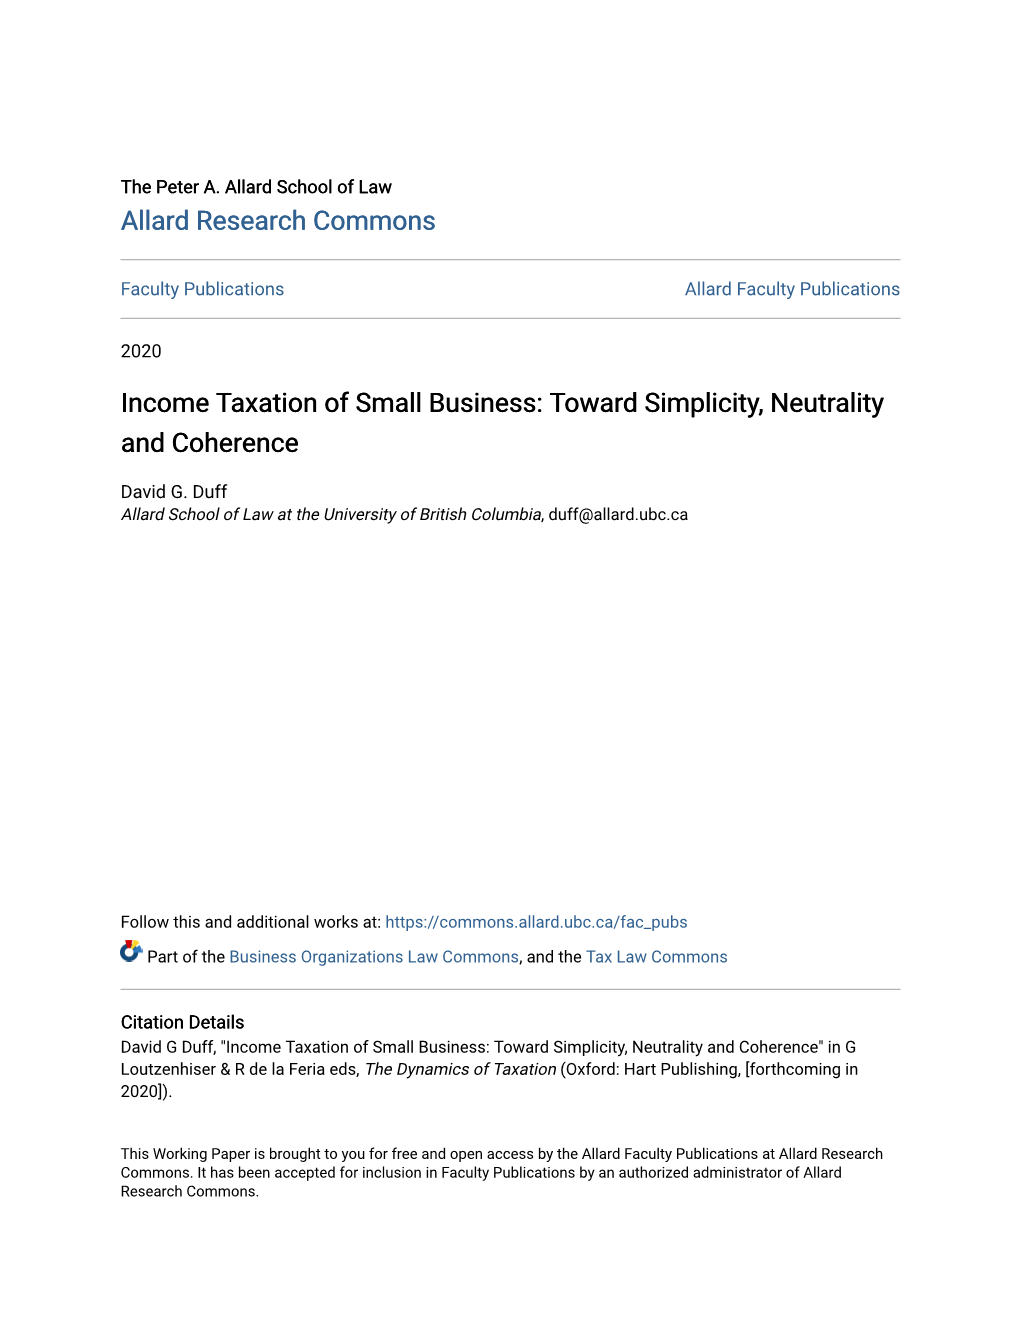 Income Taxation of Small Business: Toward Simplicity, Neutrality and Coherence